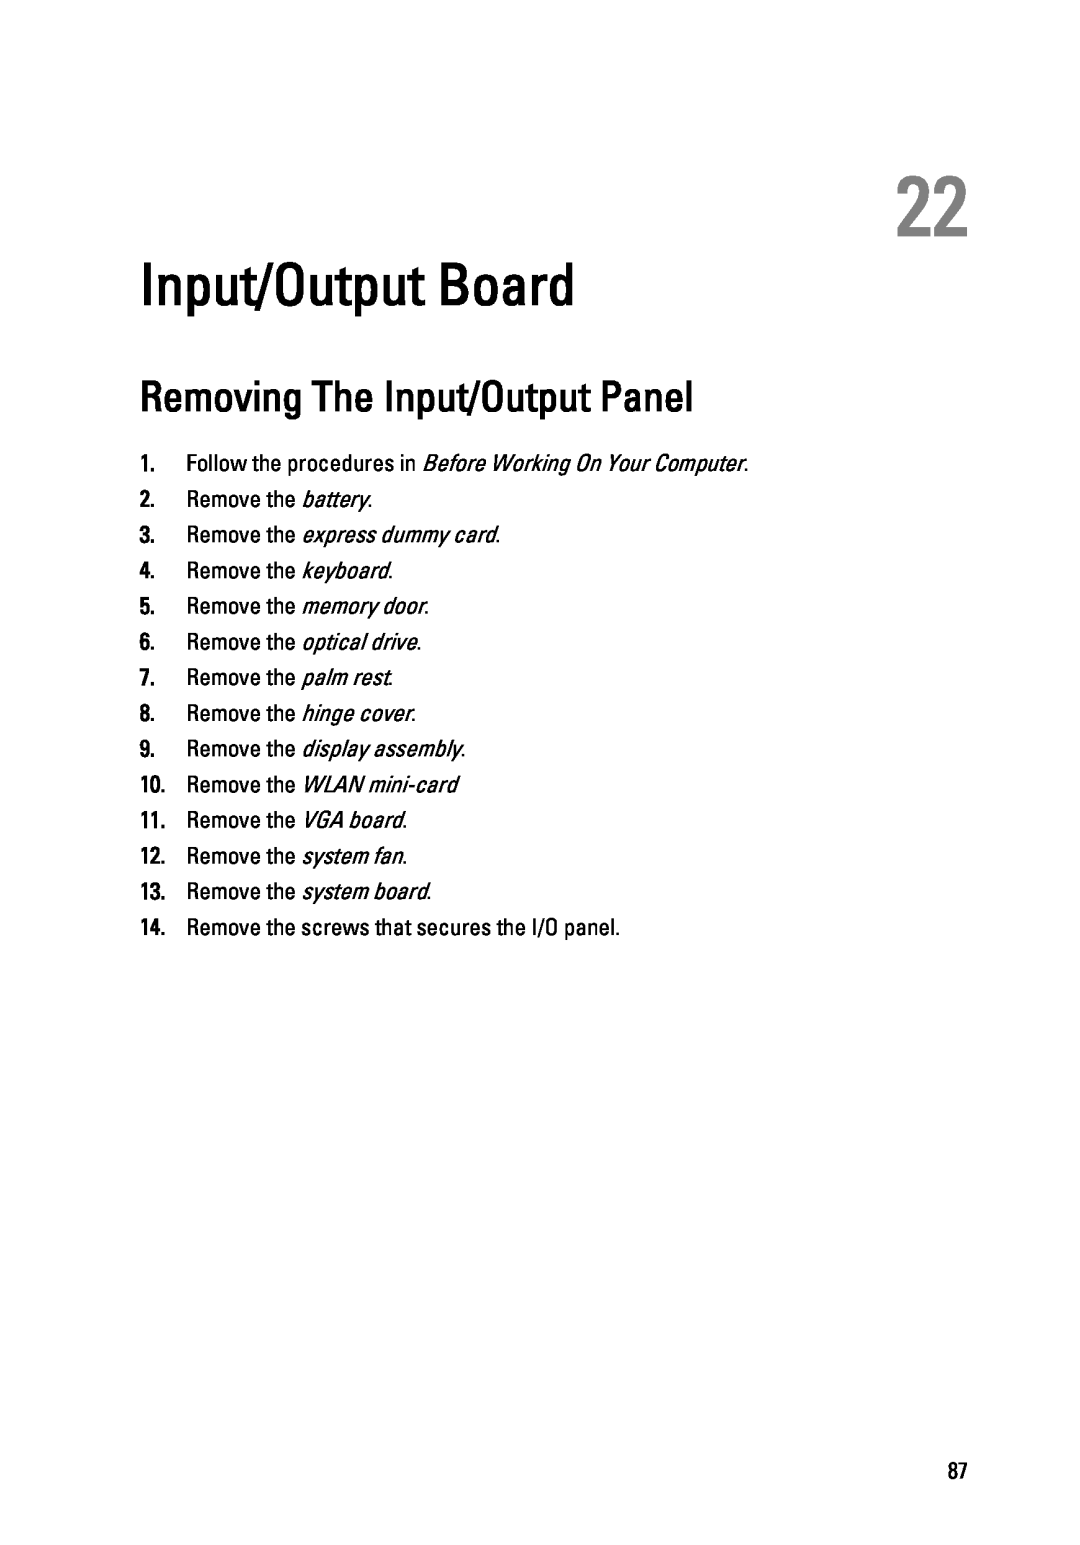 Dell 3450 Input/Output Board, Removing The Input/Output Panel, Follow the procedures in Before Working On Your Computer 